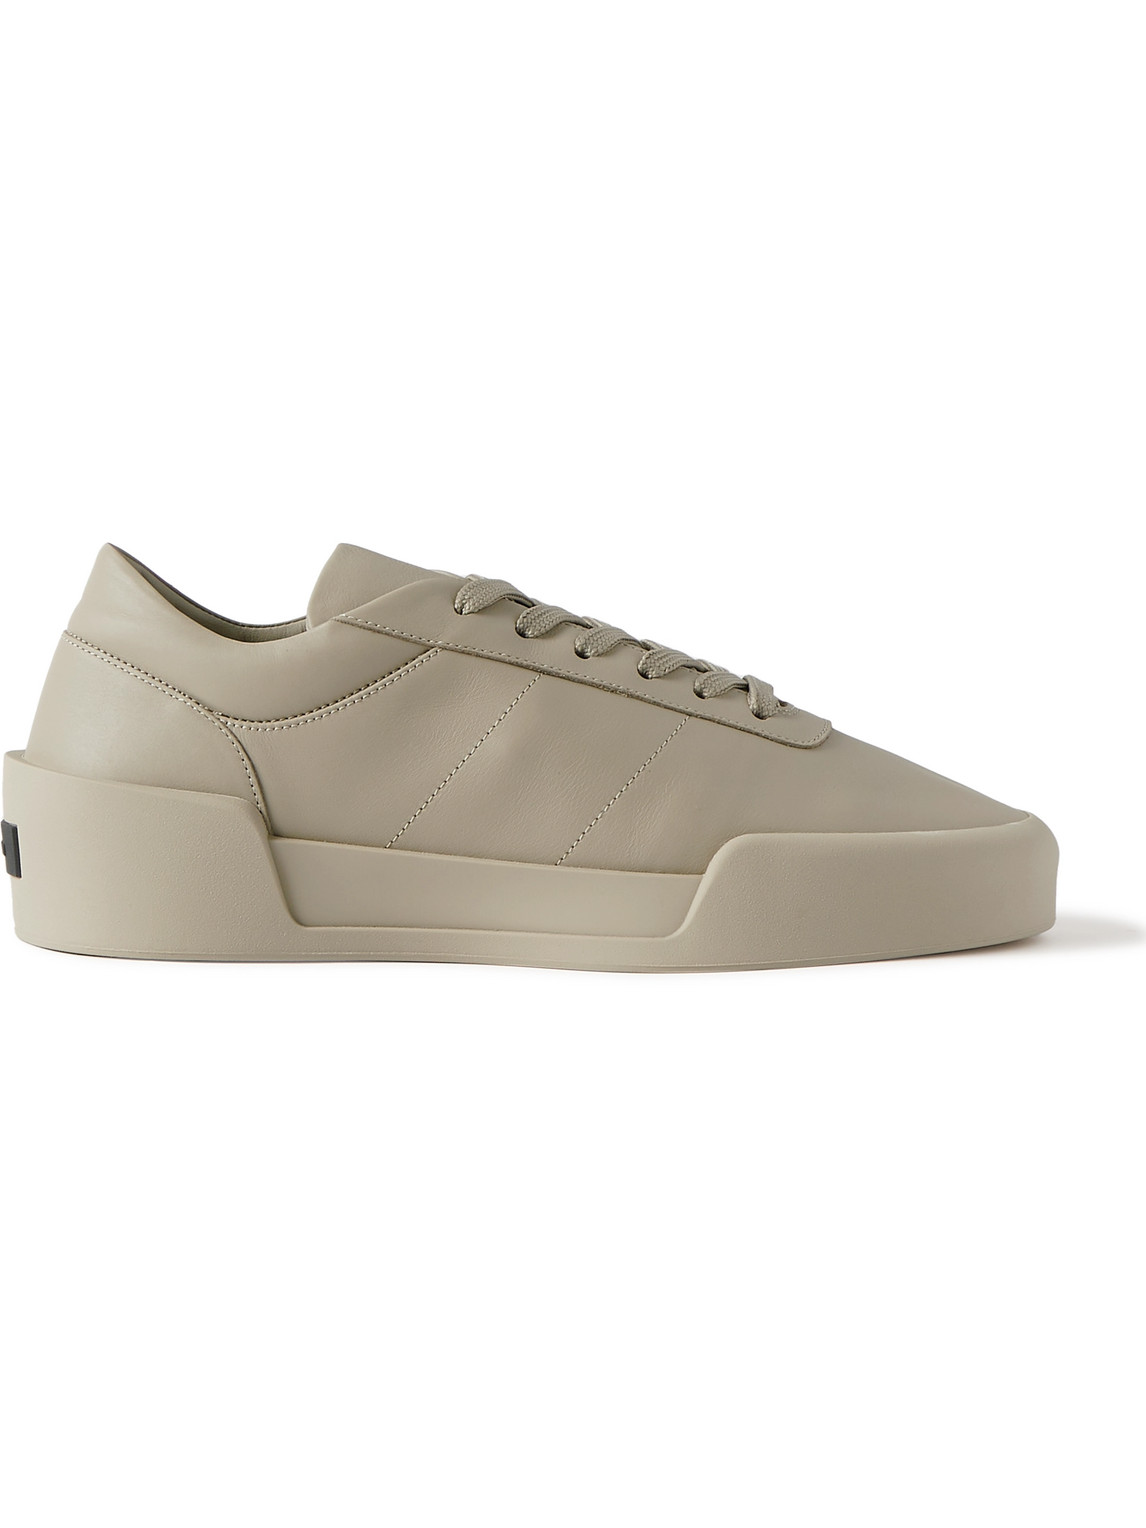 Fear Of God Aerobic Low Leather Sneakers In Brown